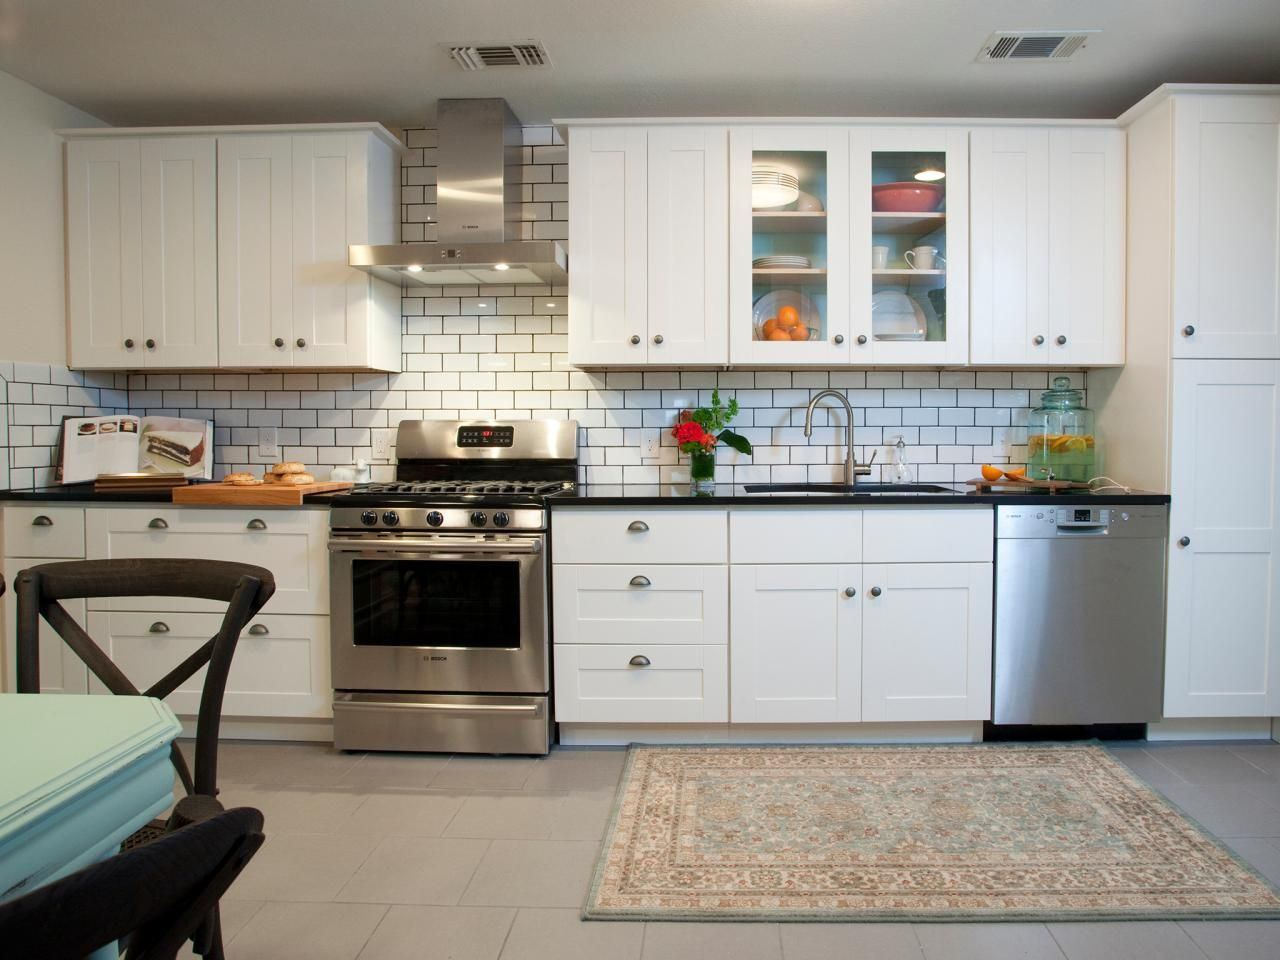 White Kitchen Subway Tile
 Dress Your Kitchen In Style With Some White Subway Tiles